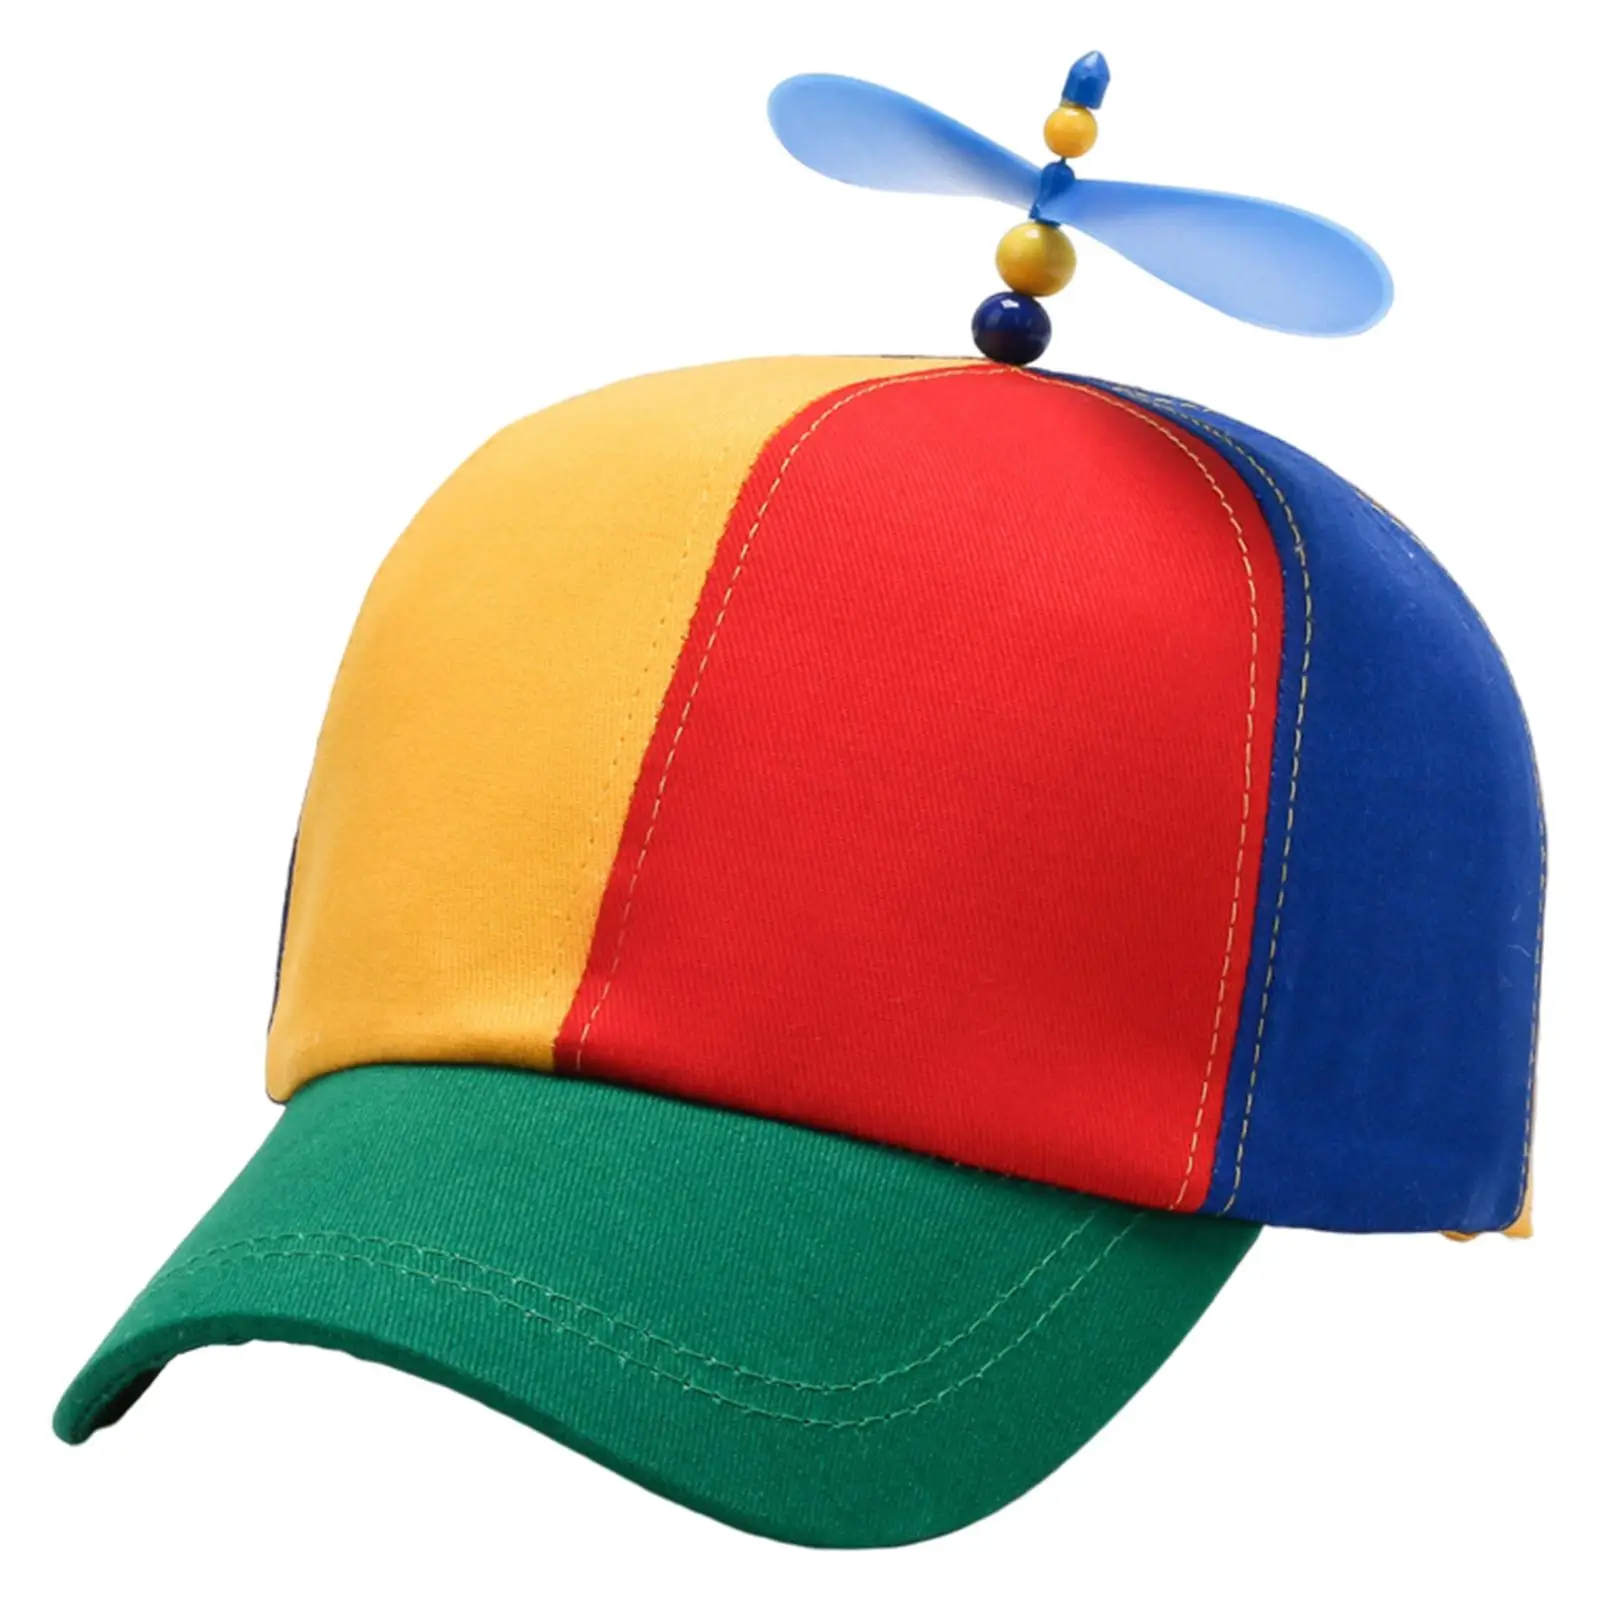 Propeller Hat, Brightly Color with Propeller On Top Spinning Propeller Ball Hat Adjustable Size Baseball Hat for Women Girl